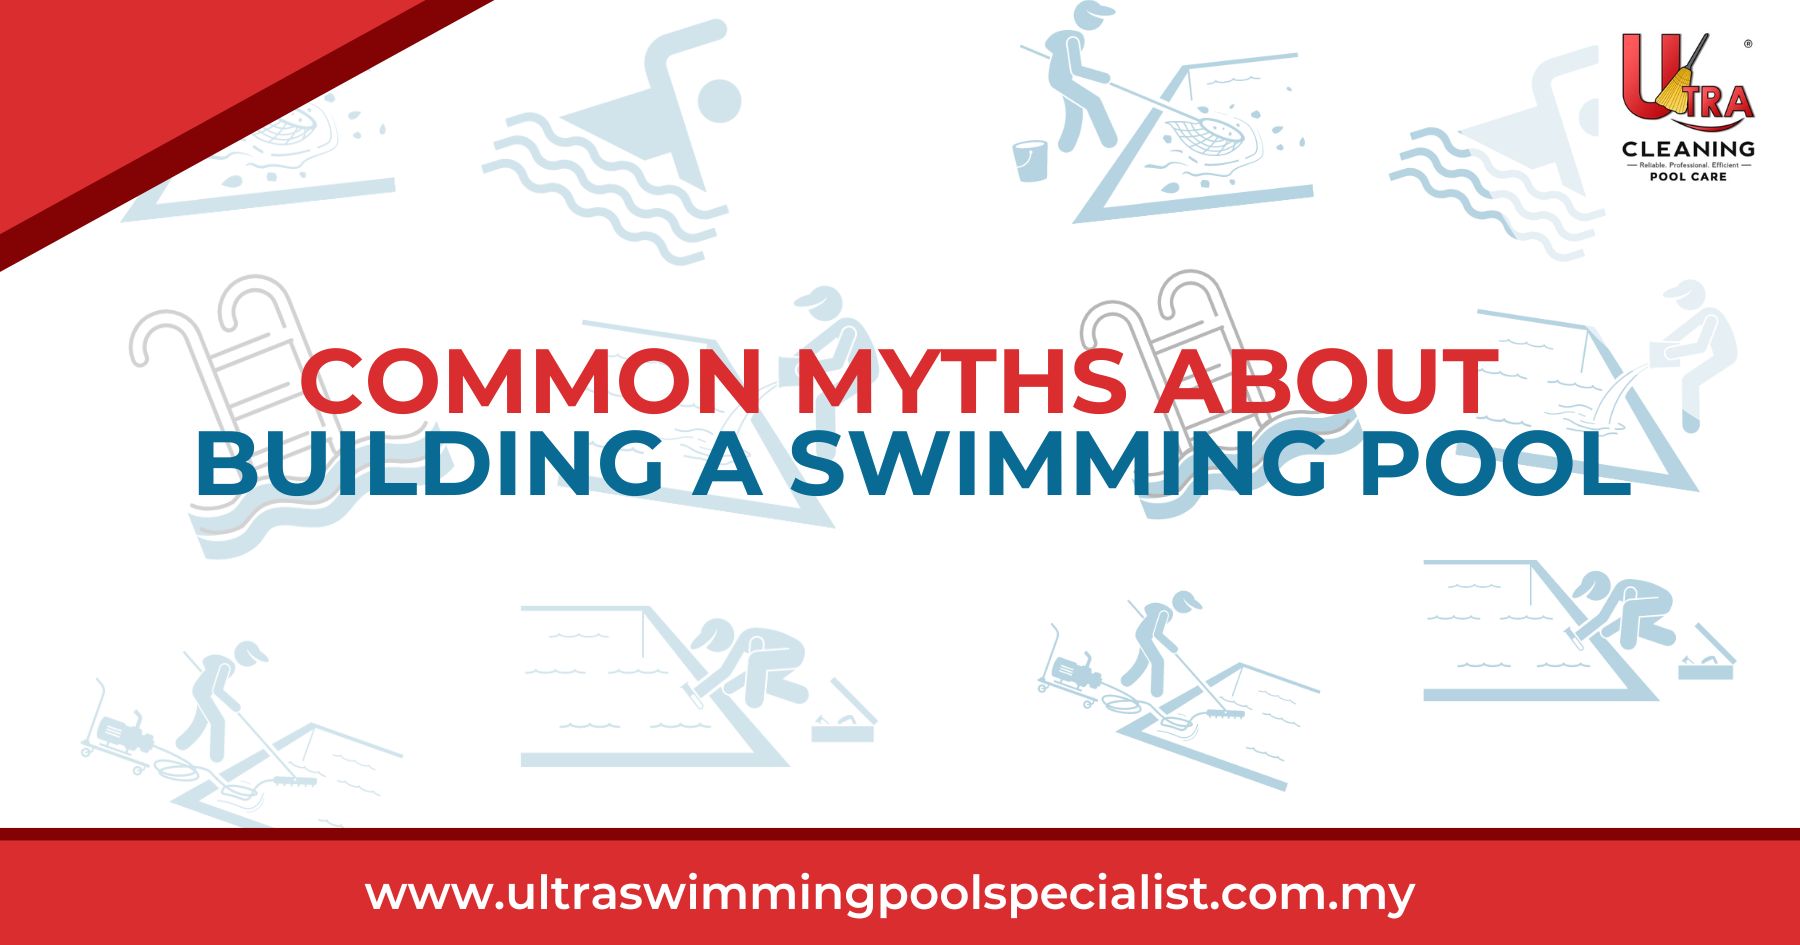 Common Myths About Building a Swimming Pool